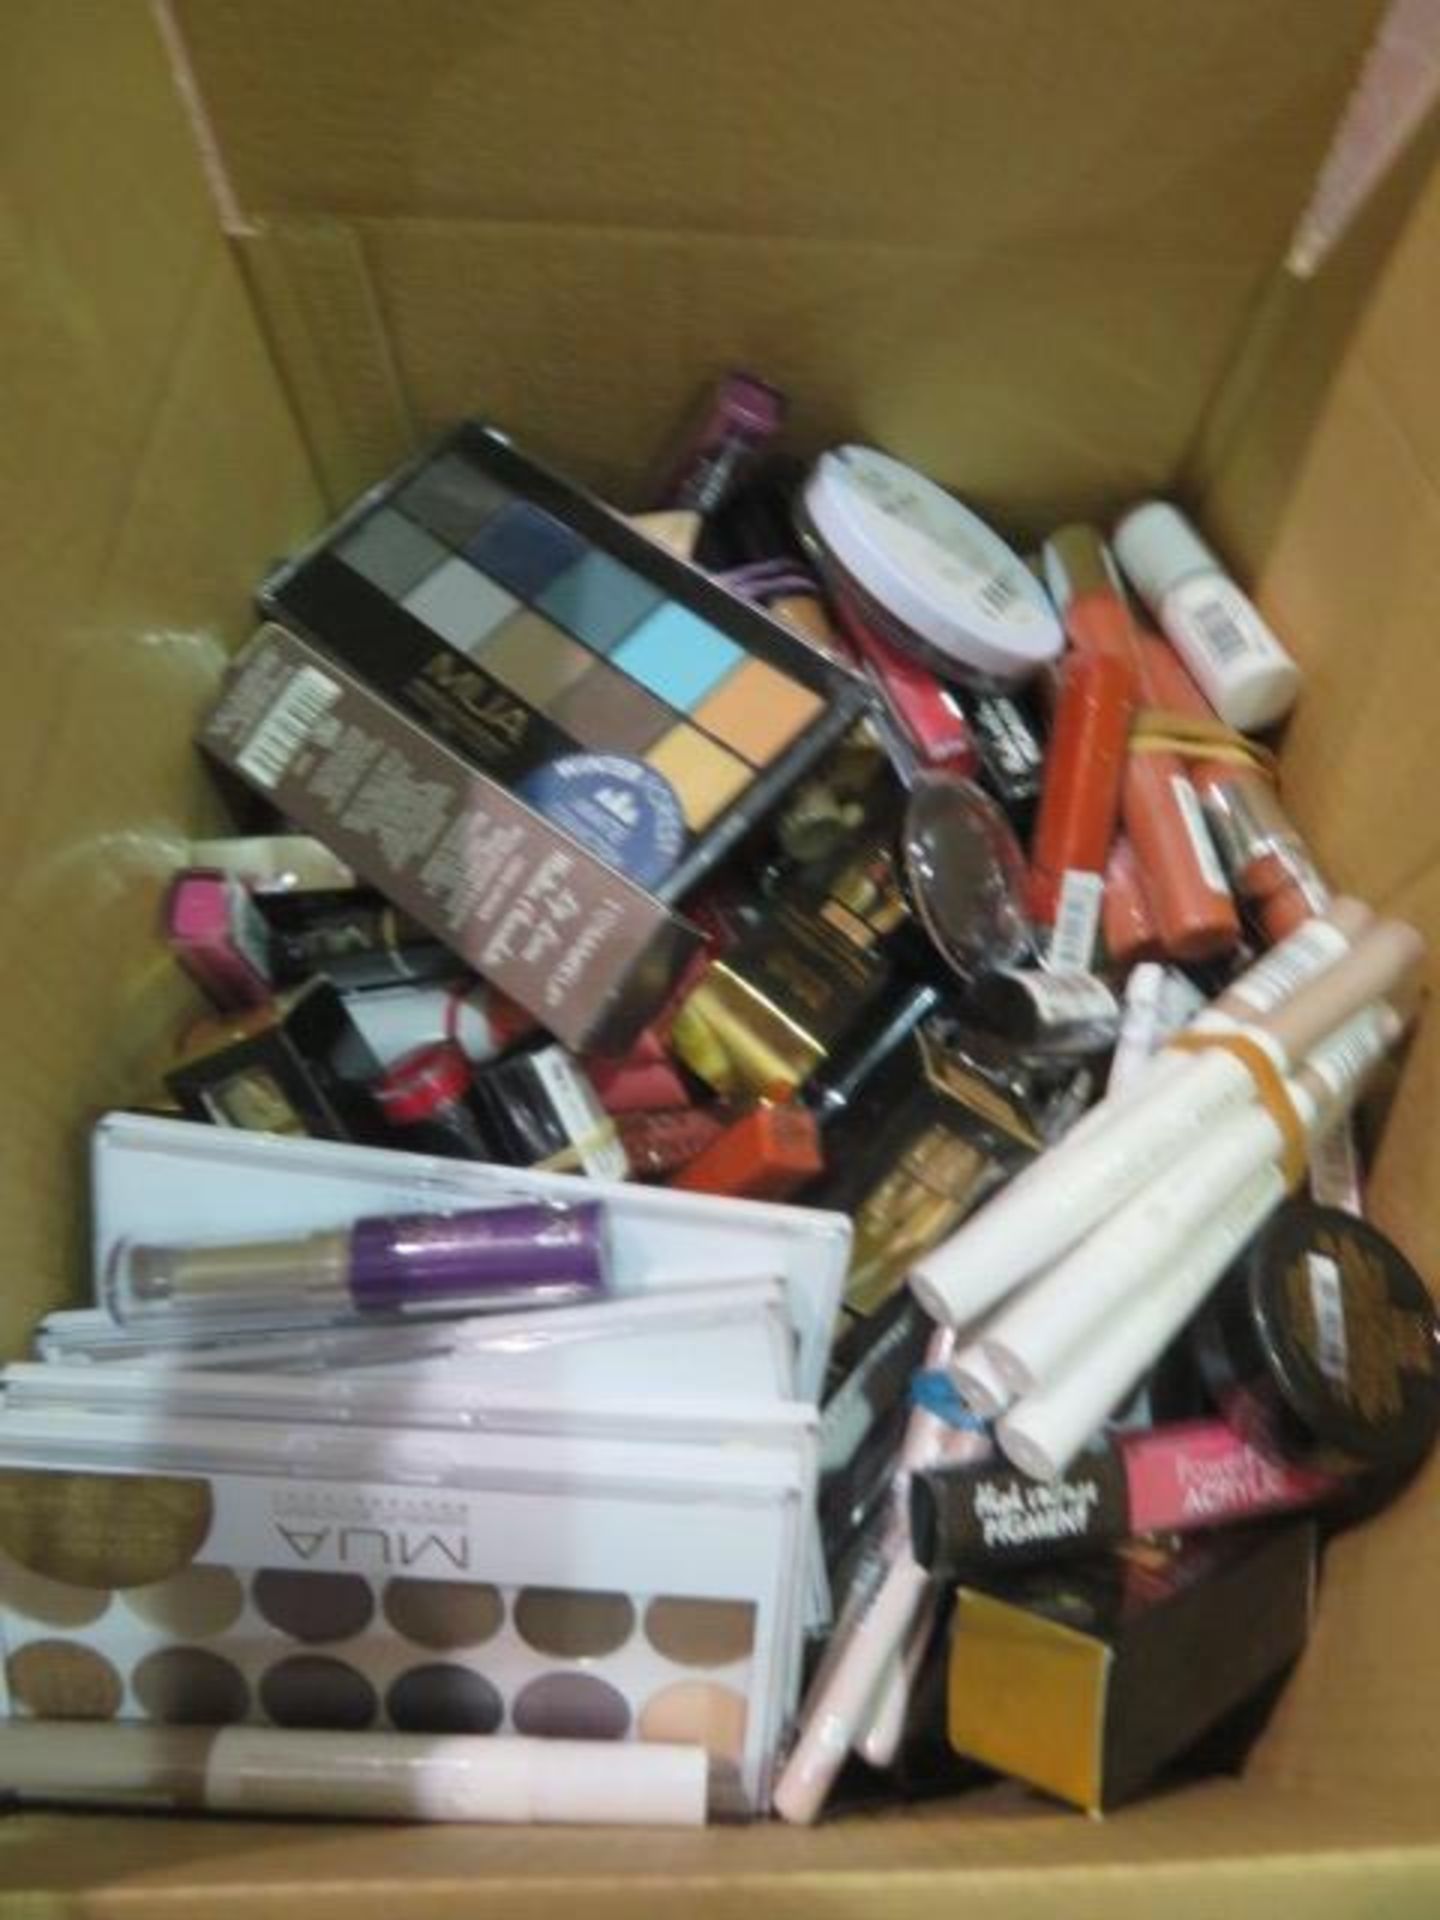 Circa. 200 items of various new make up acadamy make up to include: salted caramel lip lava, po...